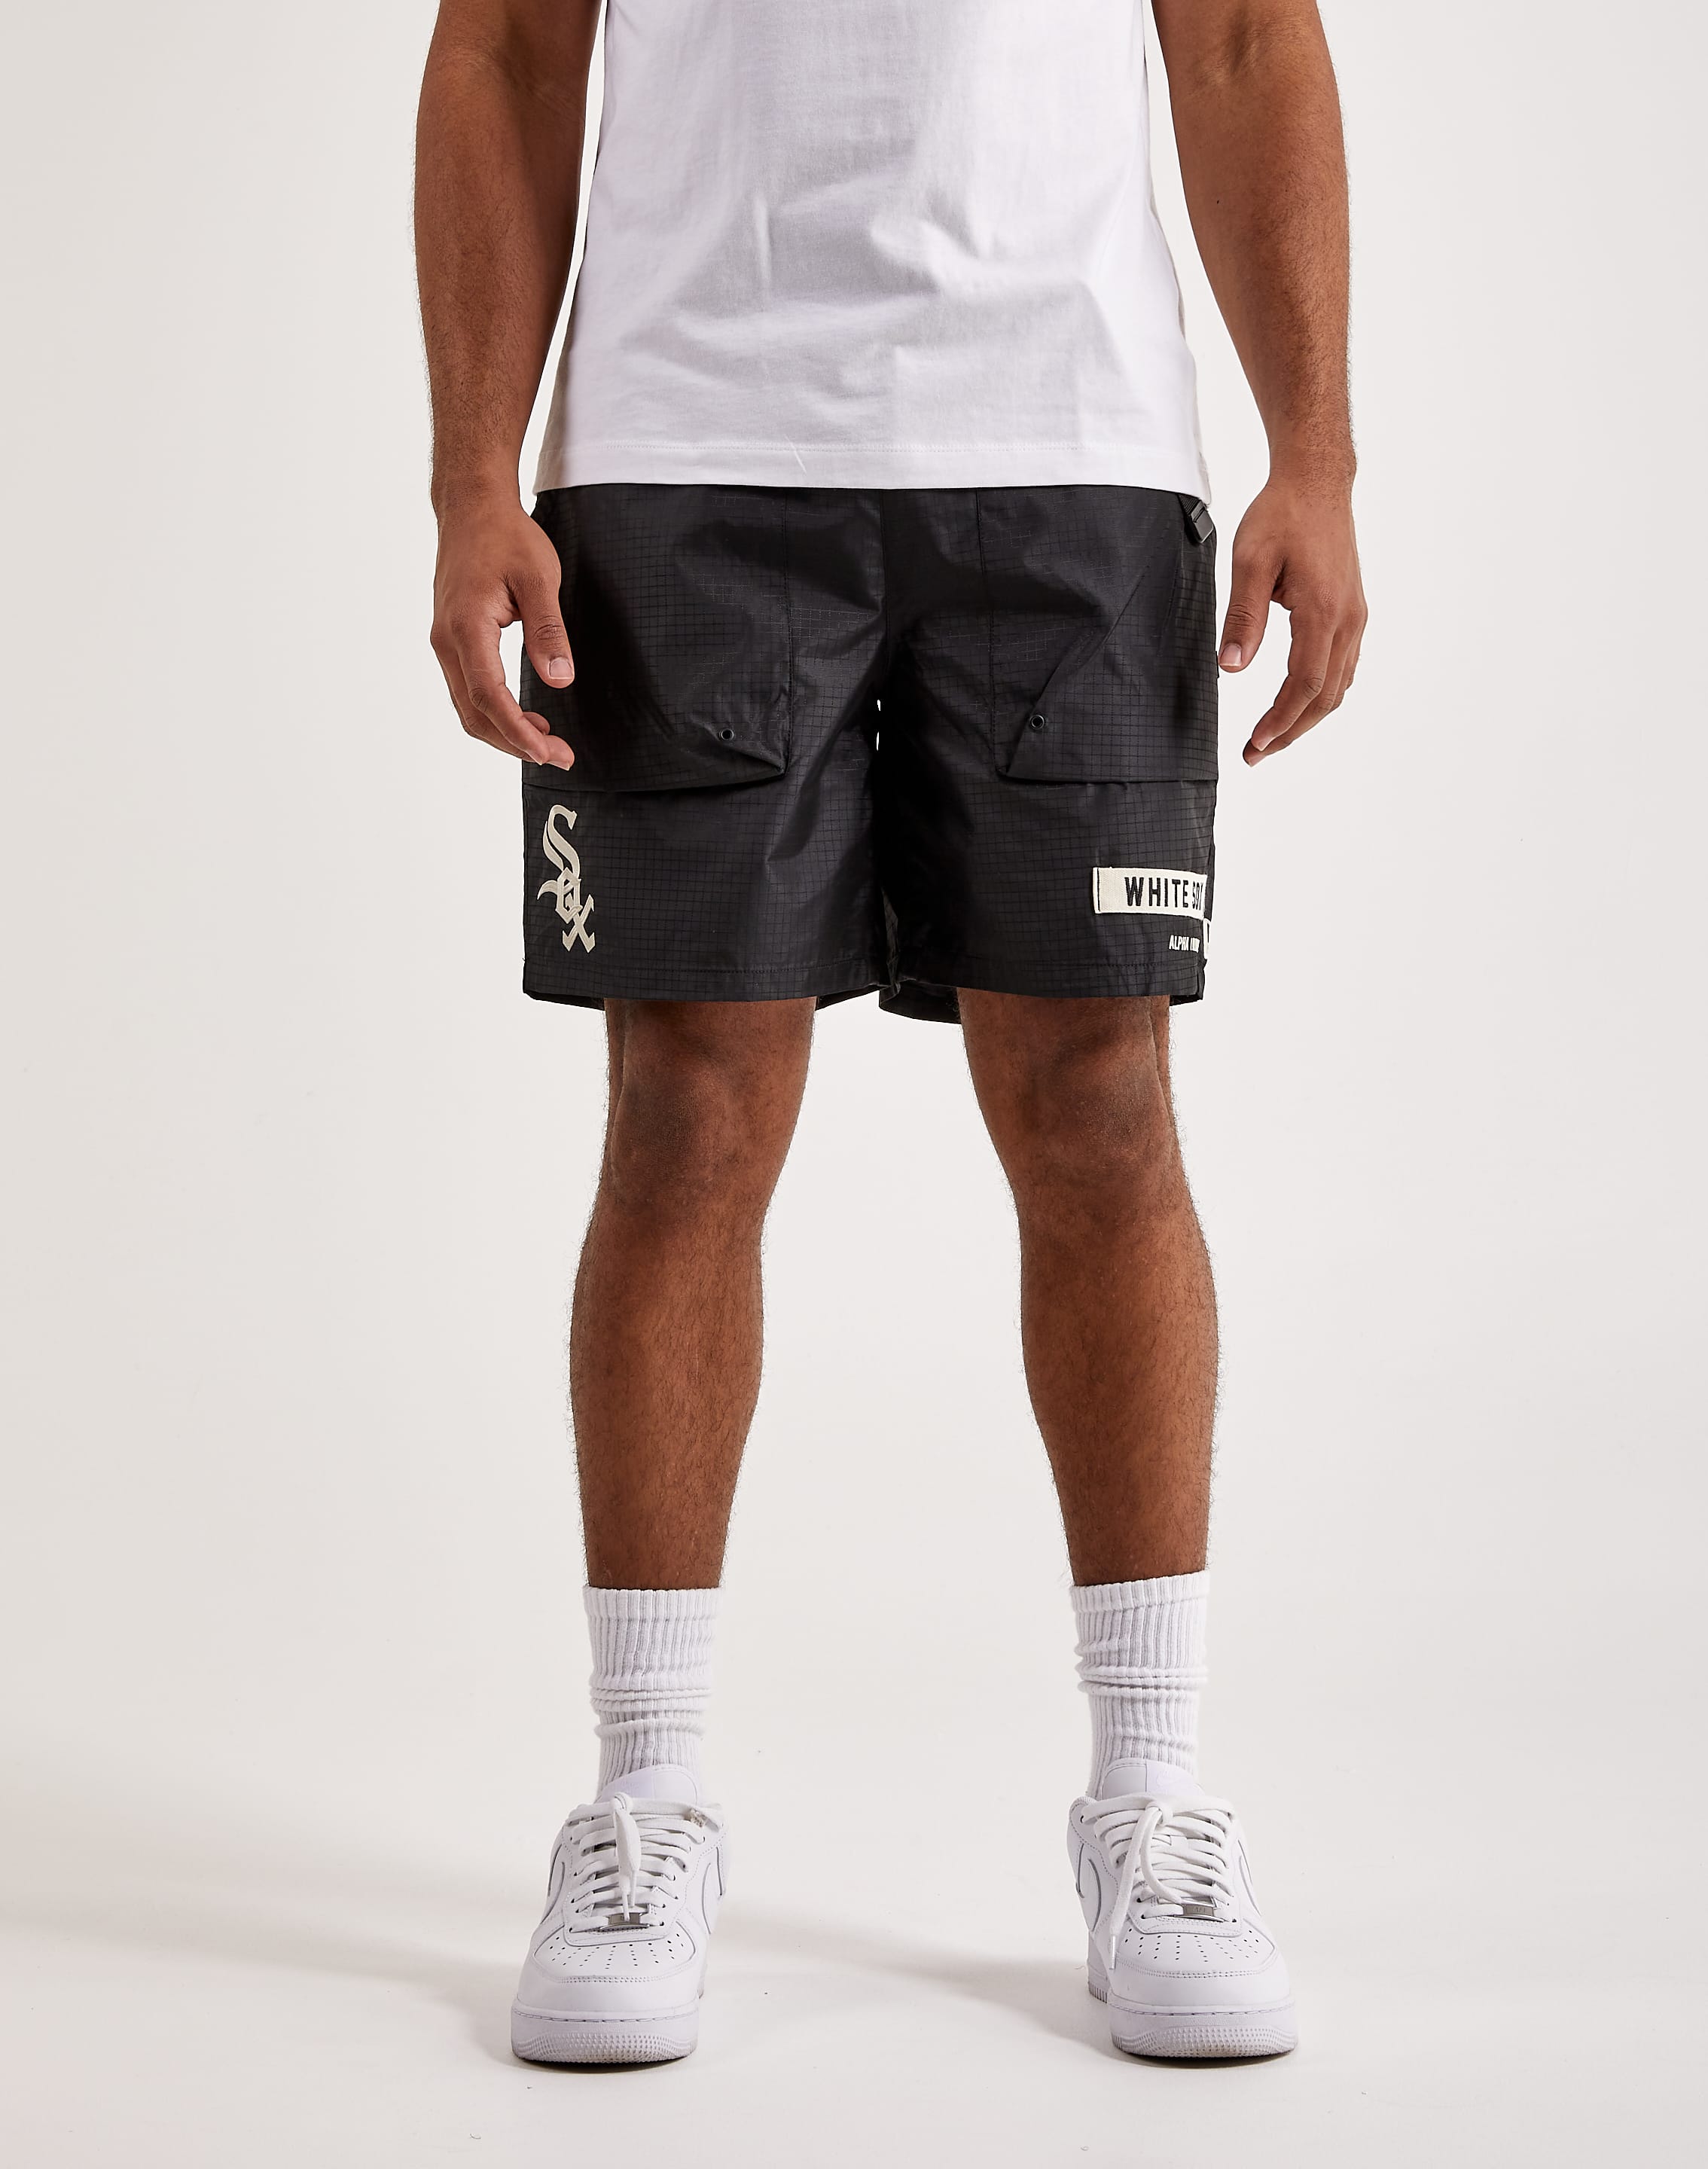 Alpha Industries Chicago White Sox Shorts – DTLR | Shorts